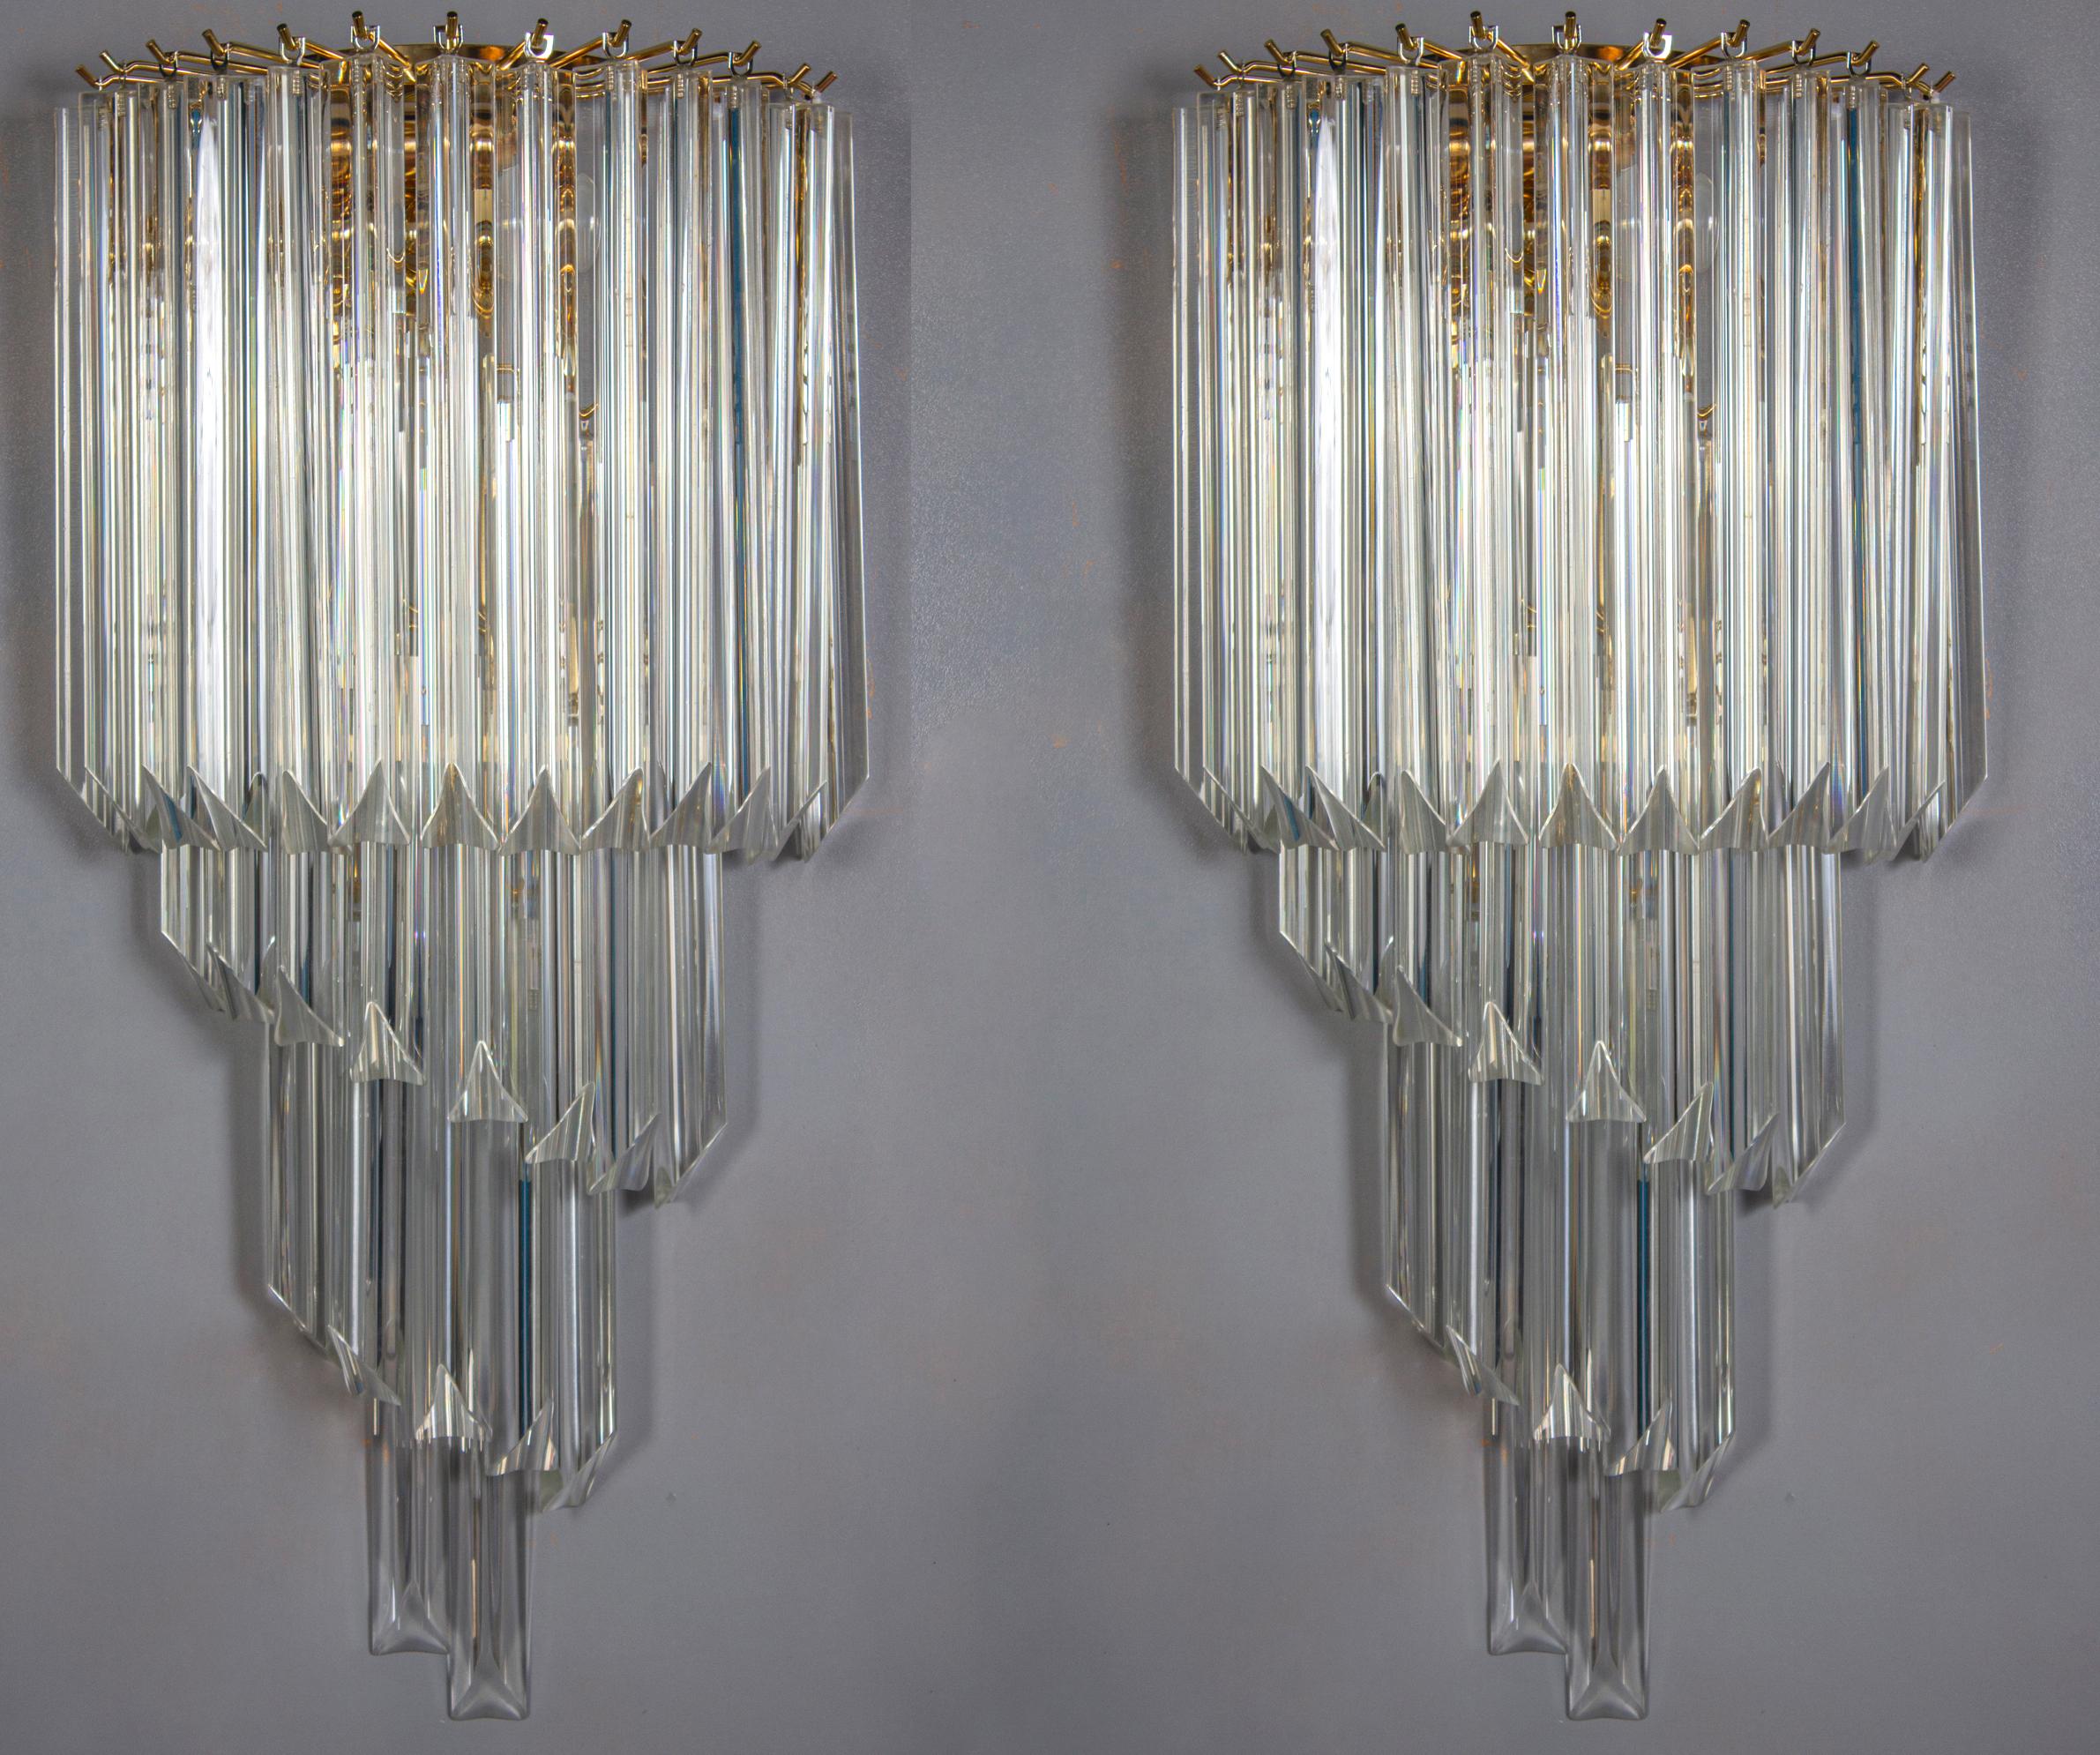 Fine pair of spiral shape vintage Murano wall sconces made by dozens of Murano crystal prism with a gold metal frame.
Dimensions: 23,6 inches height (60 cm); 11,80 inches width (30 cm); 5,50 inches depth from the wall (14 cm)
Dimension glasses: 11